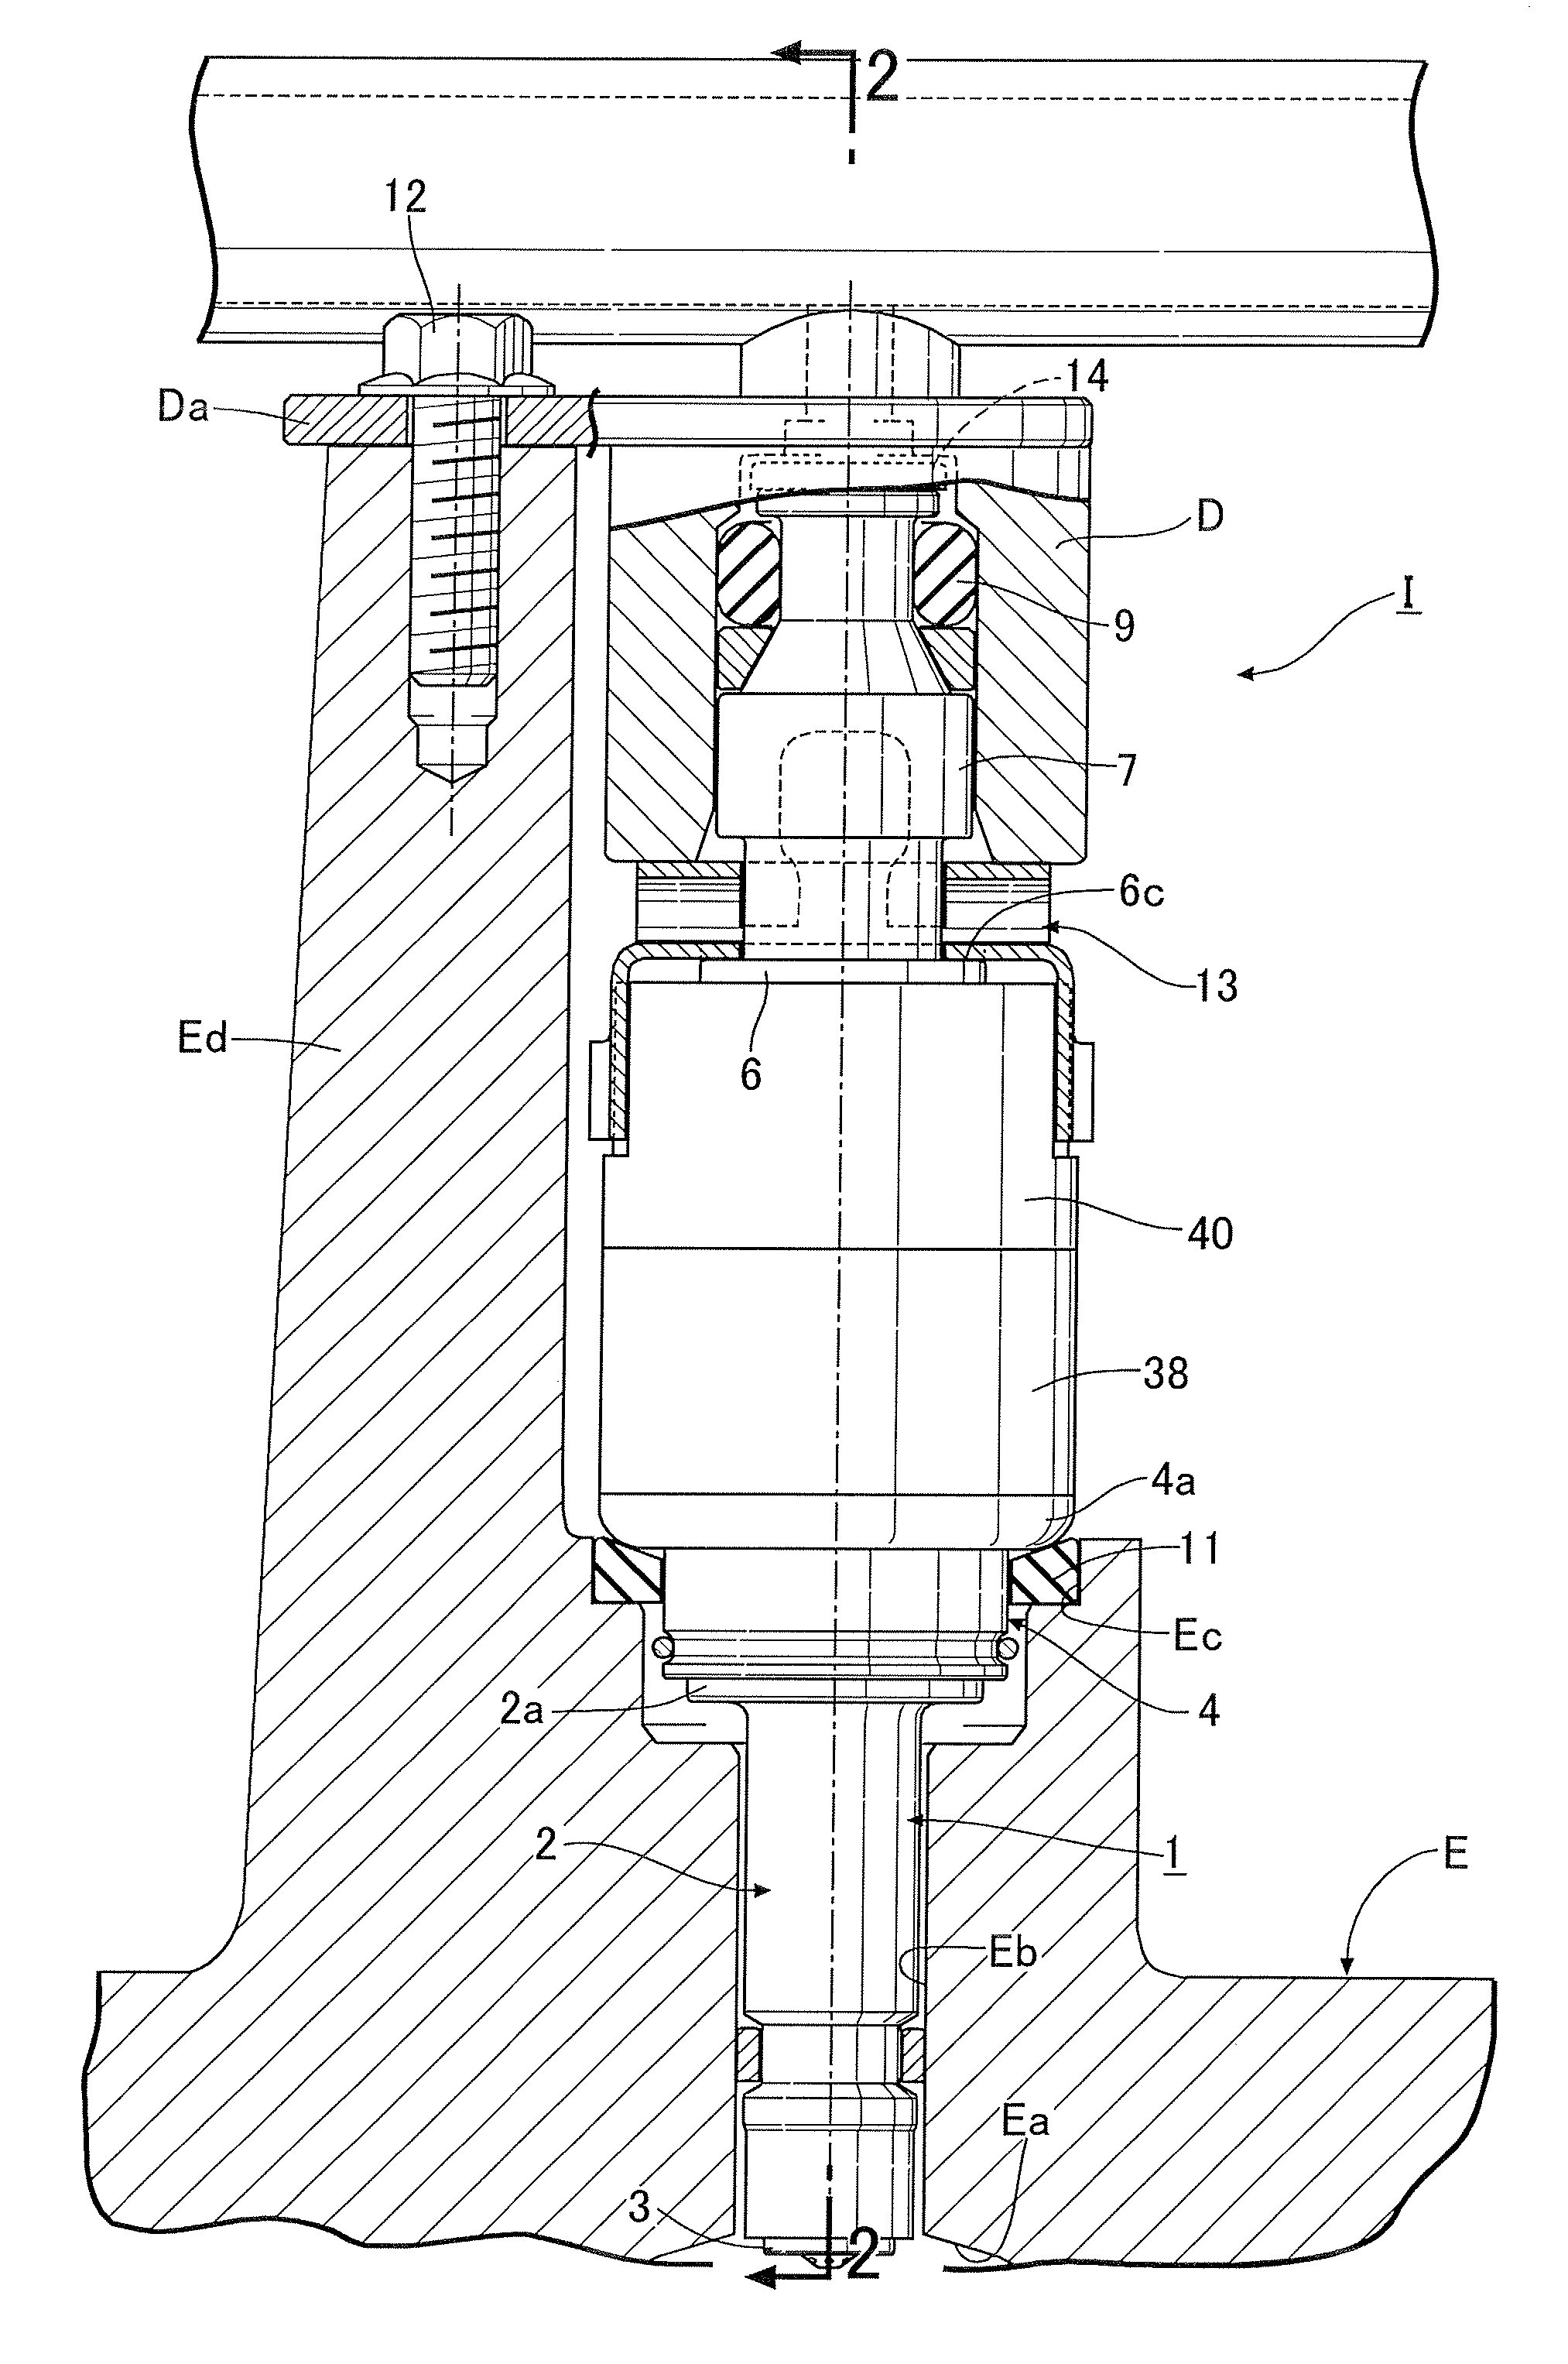 Support structure of direct fuel injection valve